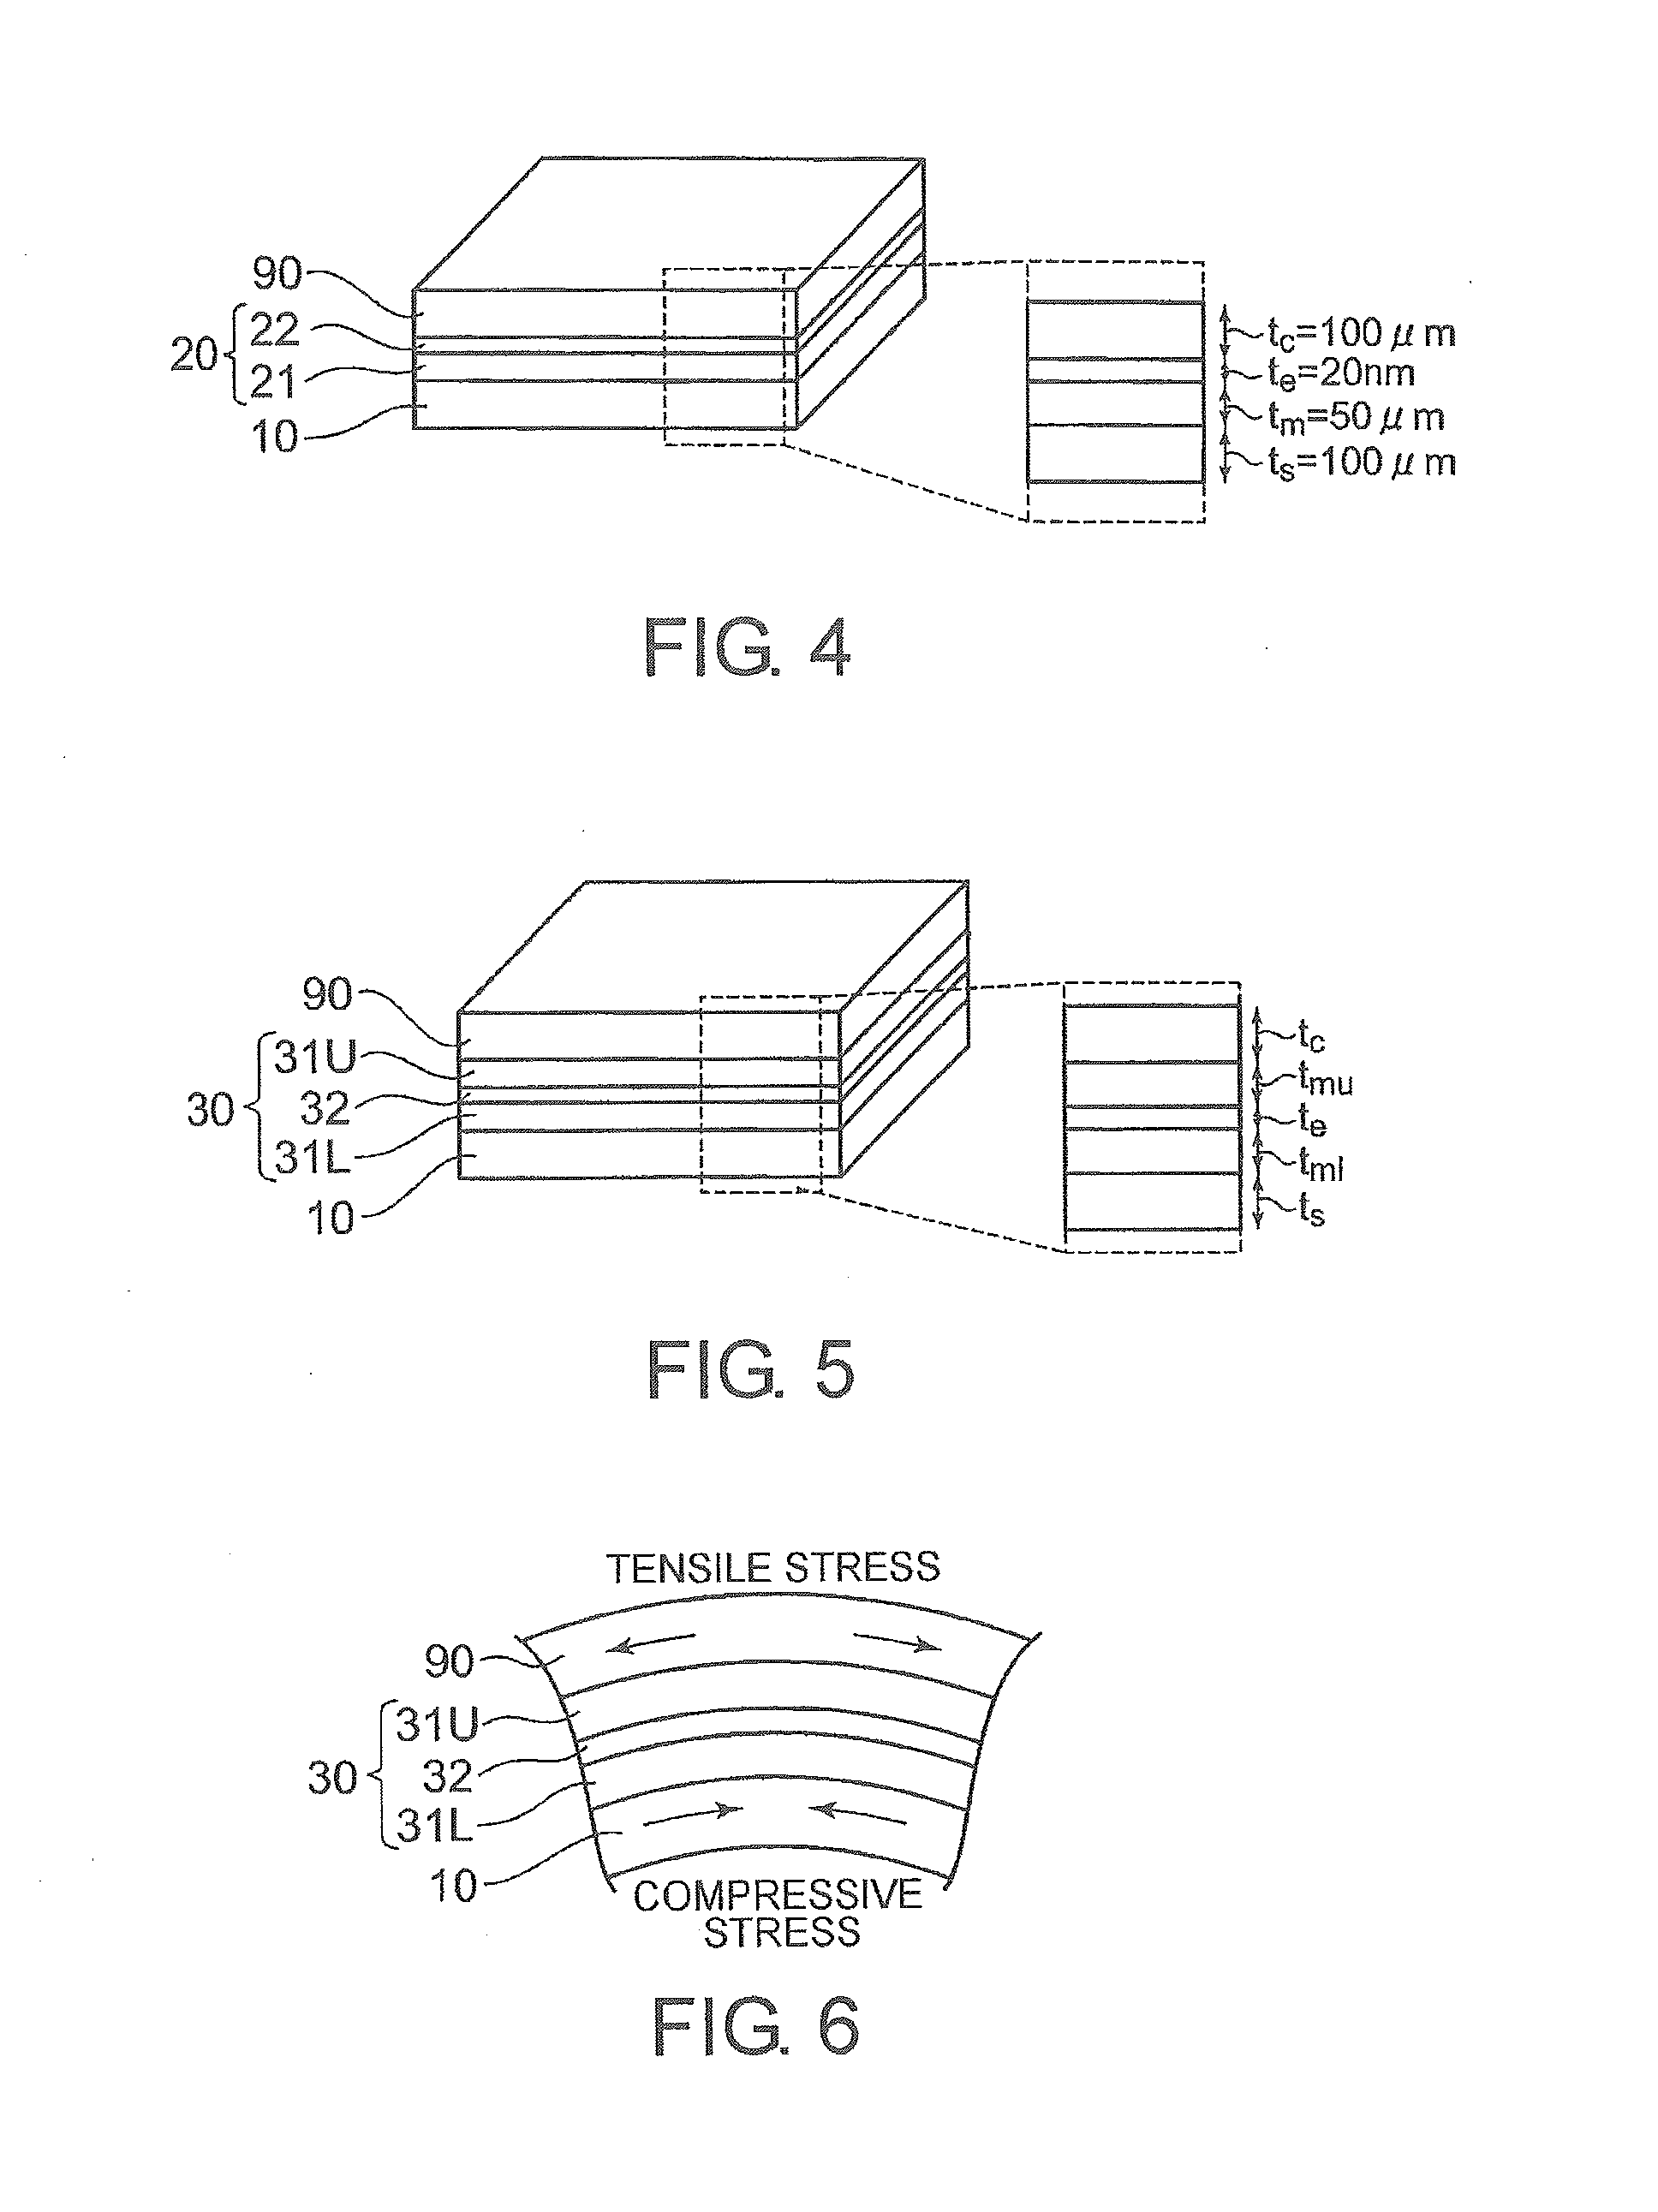 Thermoelectric conversion apparatus